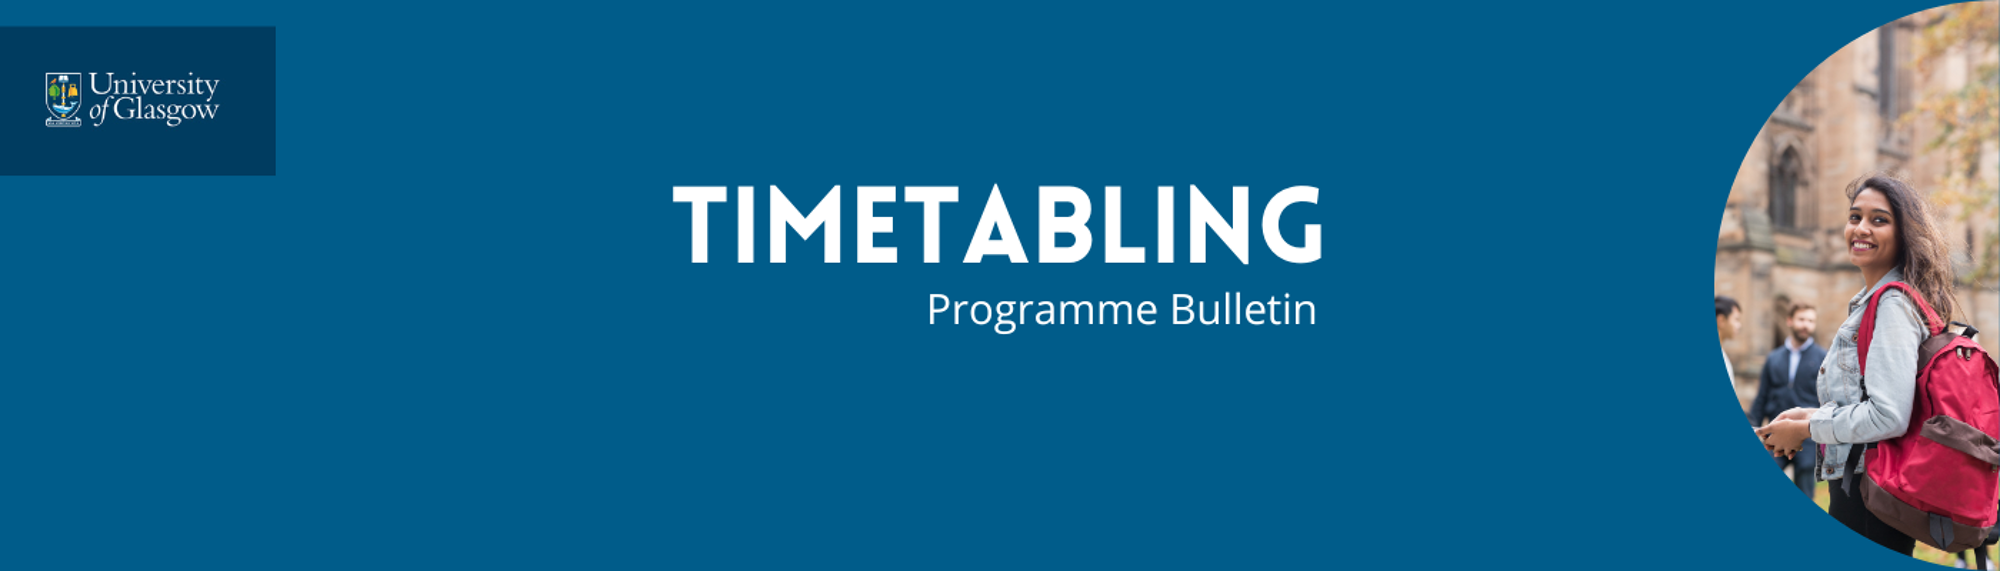 Timetabling Programme Banner in blue with image of a female student carrying a red backpack